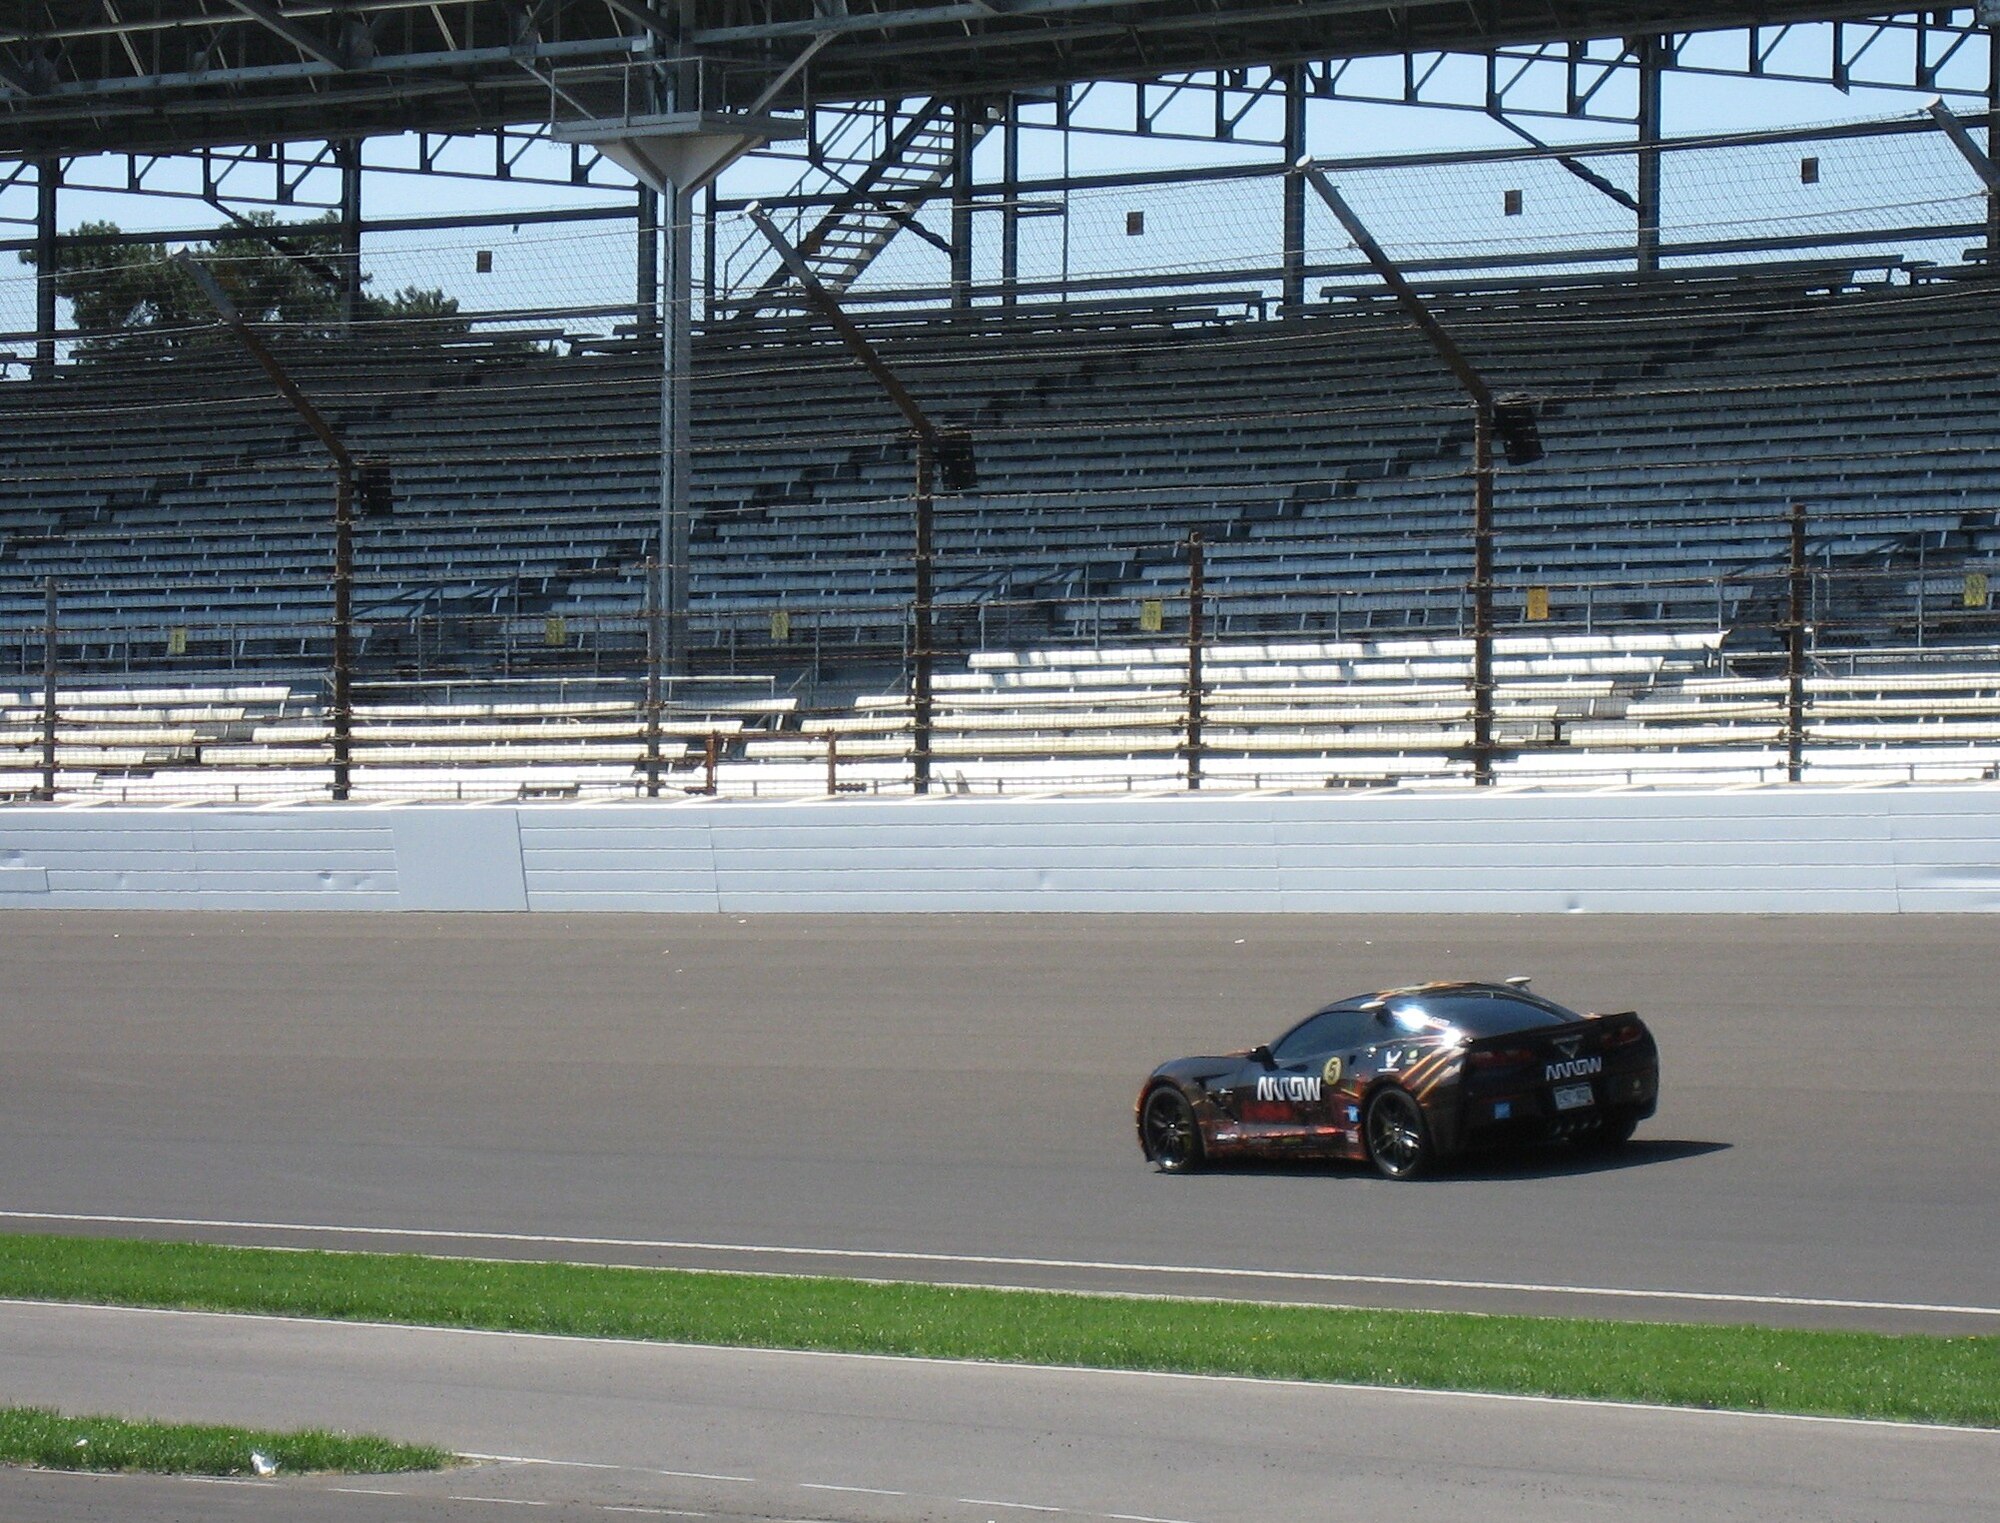 Sam Schmidt, former Indi Race Car driver drives the Semi-Autonomous Motorcar known as SAM at Indianapolis Motor Speedway (IMS) on April 23.  Schmidt plans to return to IMS on May 18 and break the 84 mpr speed drive he set on May 6 at Wright-Patterson AFB. (USAF photo by Ted Theopolos)